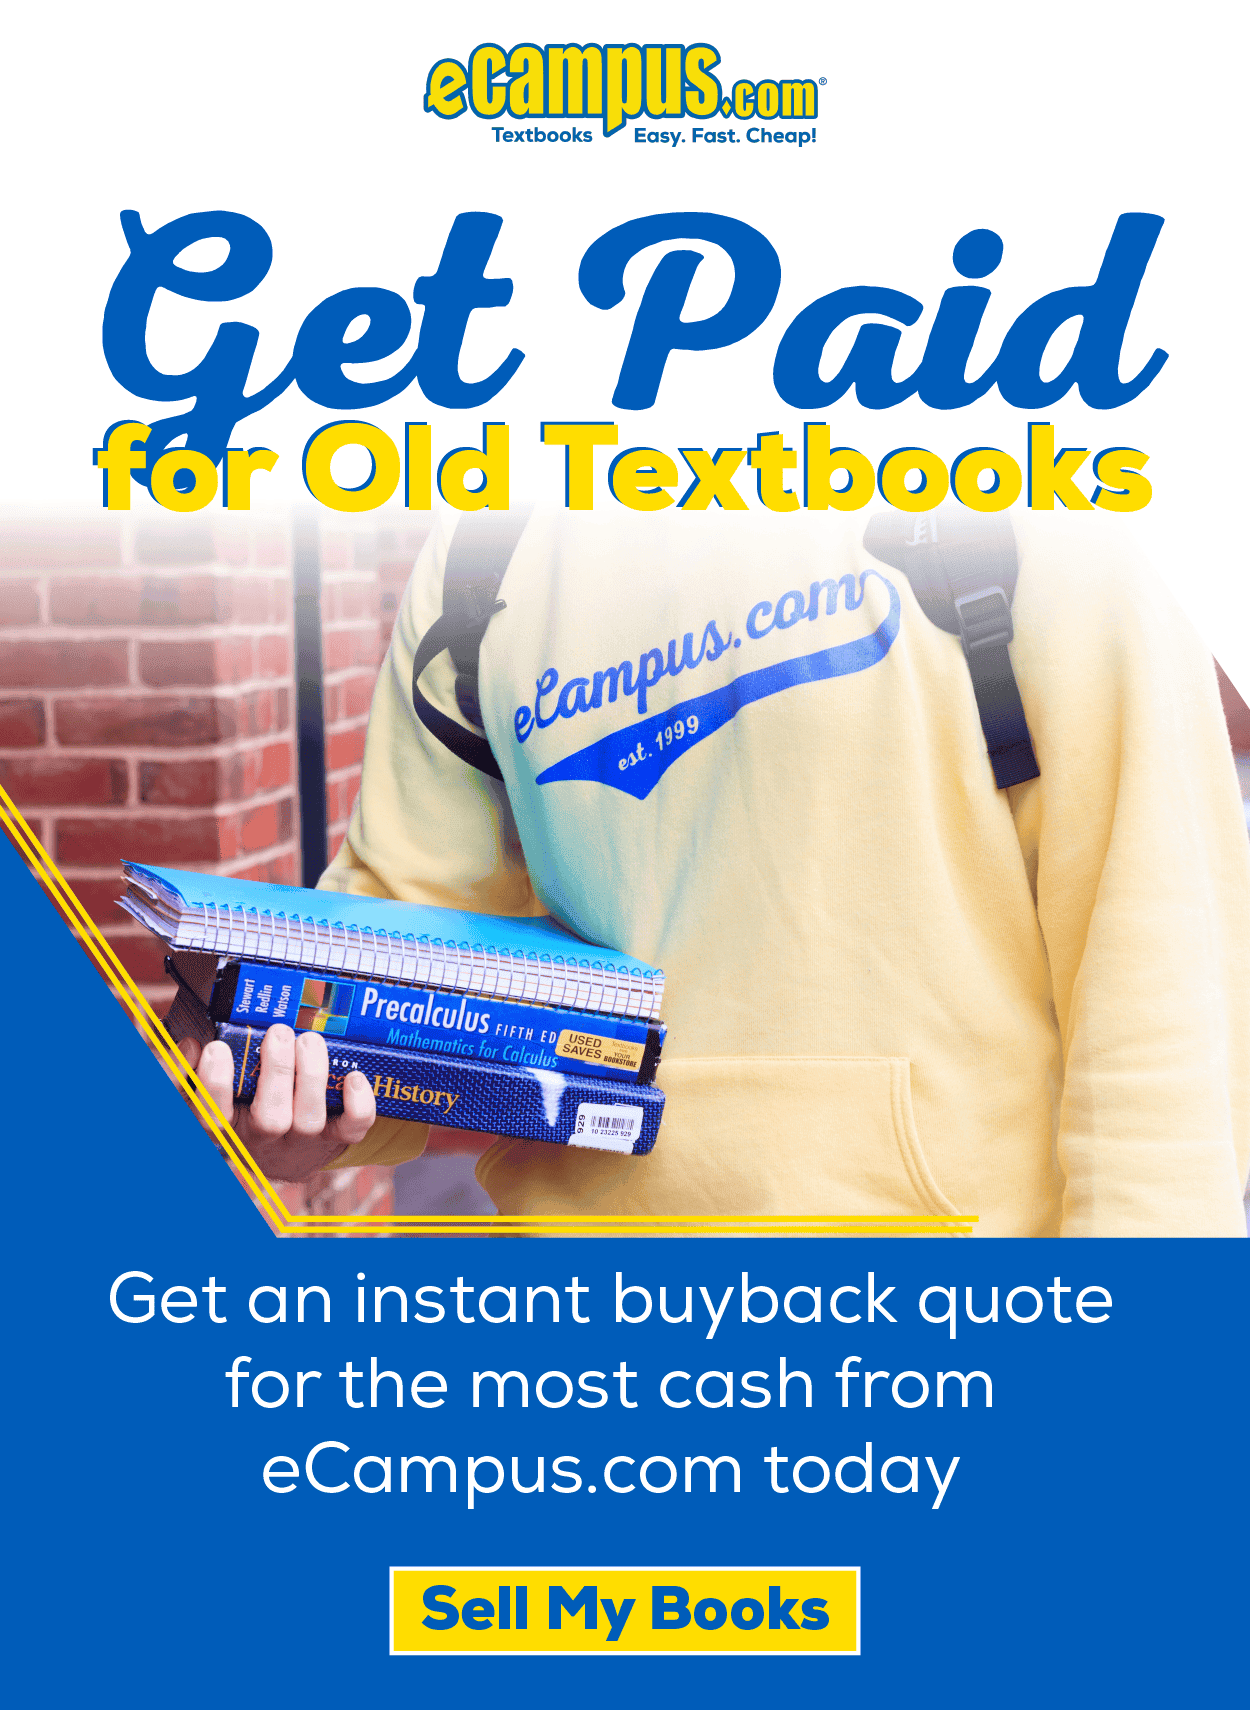 eCampus.com Logo | Get Paid for Old Textbooks | Get an instant buyback quote for the most cash from eCampus.com today | Student holding books wearing a yellow eCampus.com sweatshirt